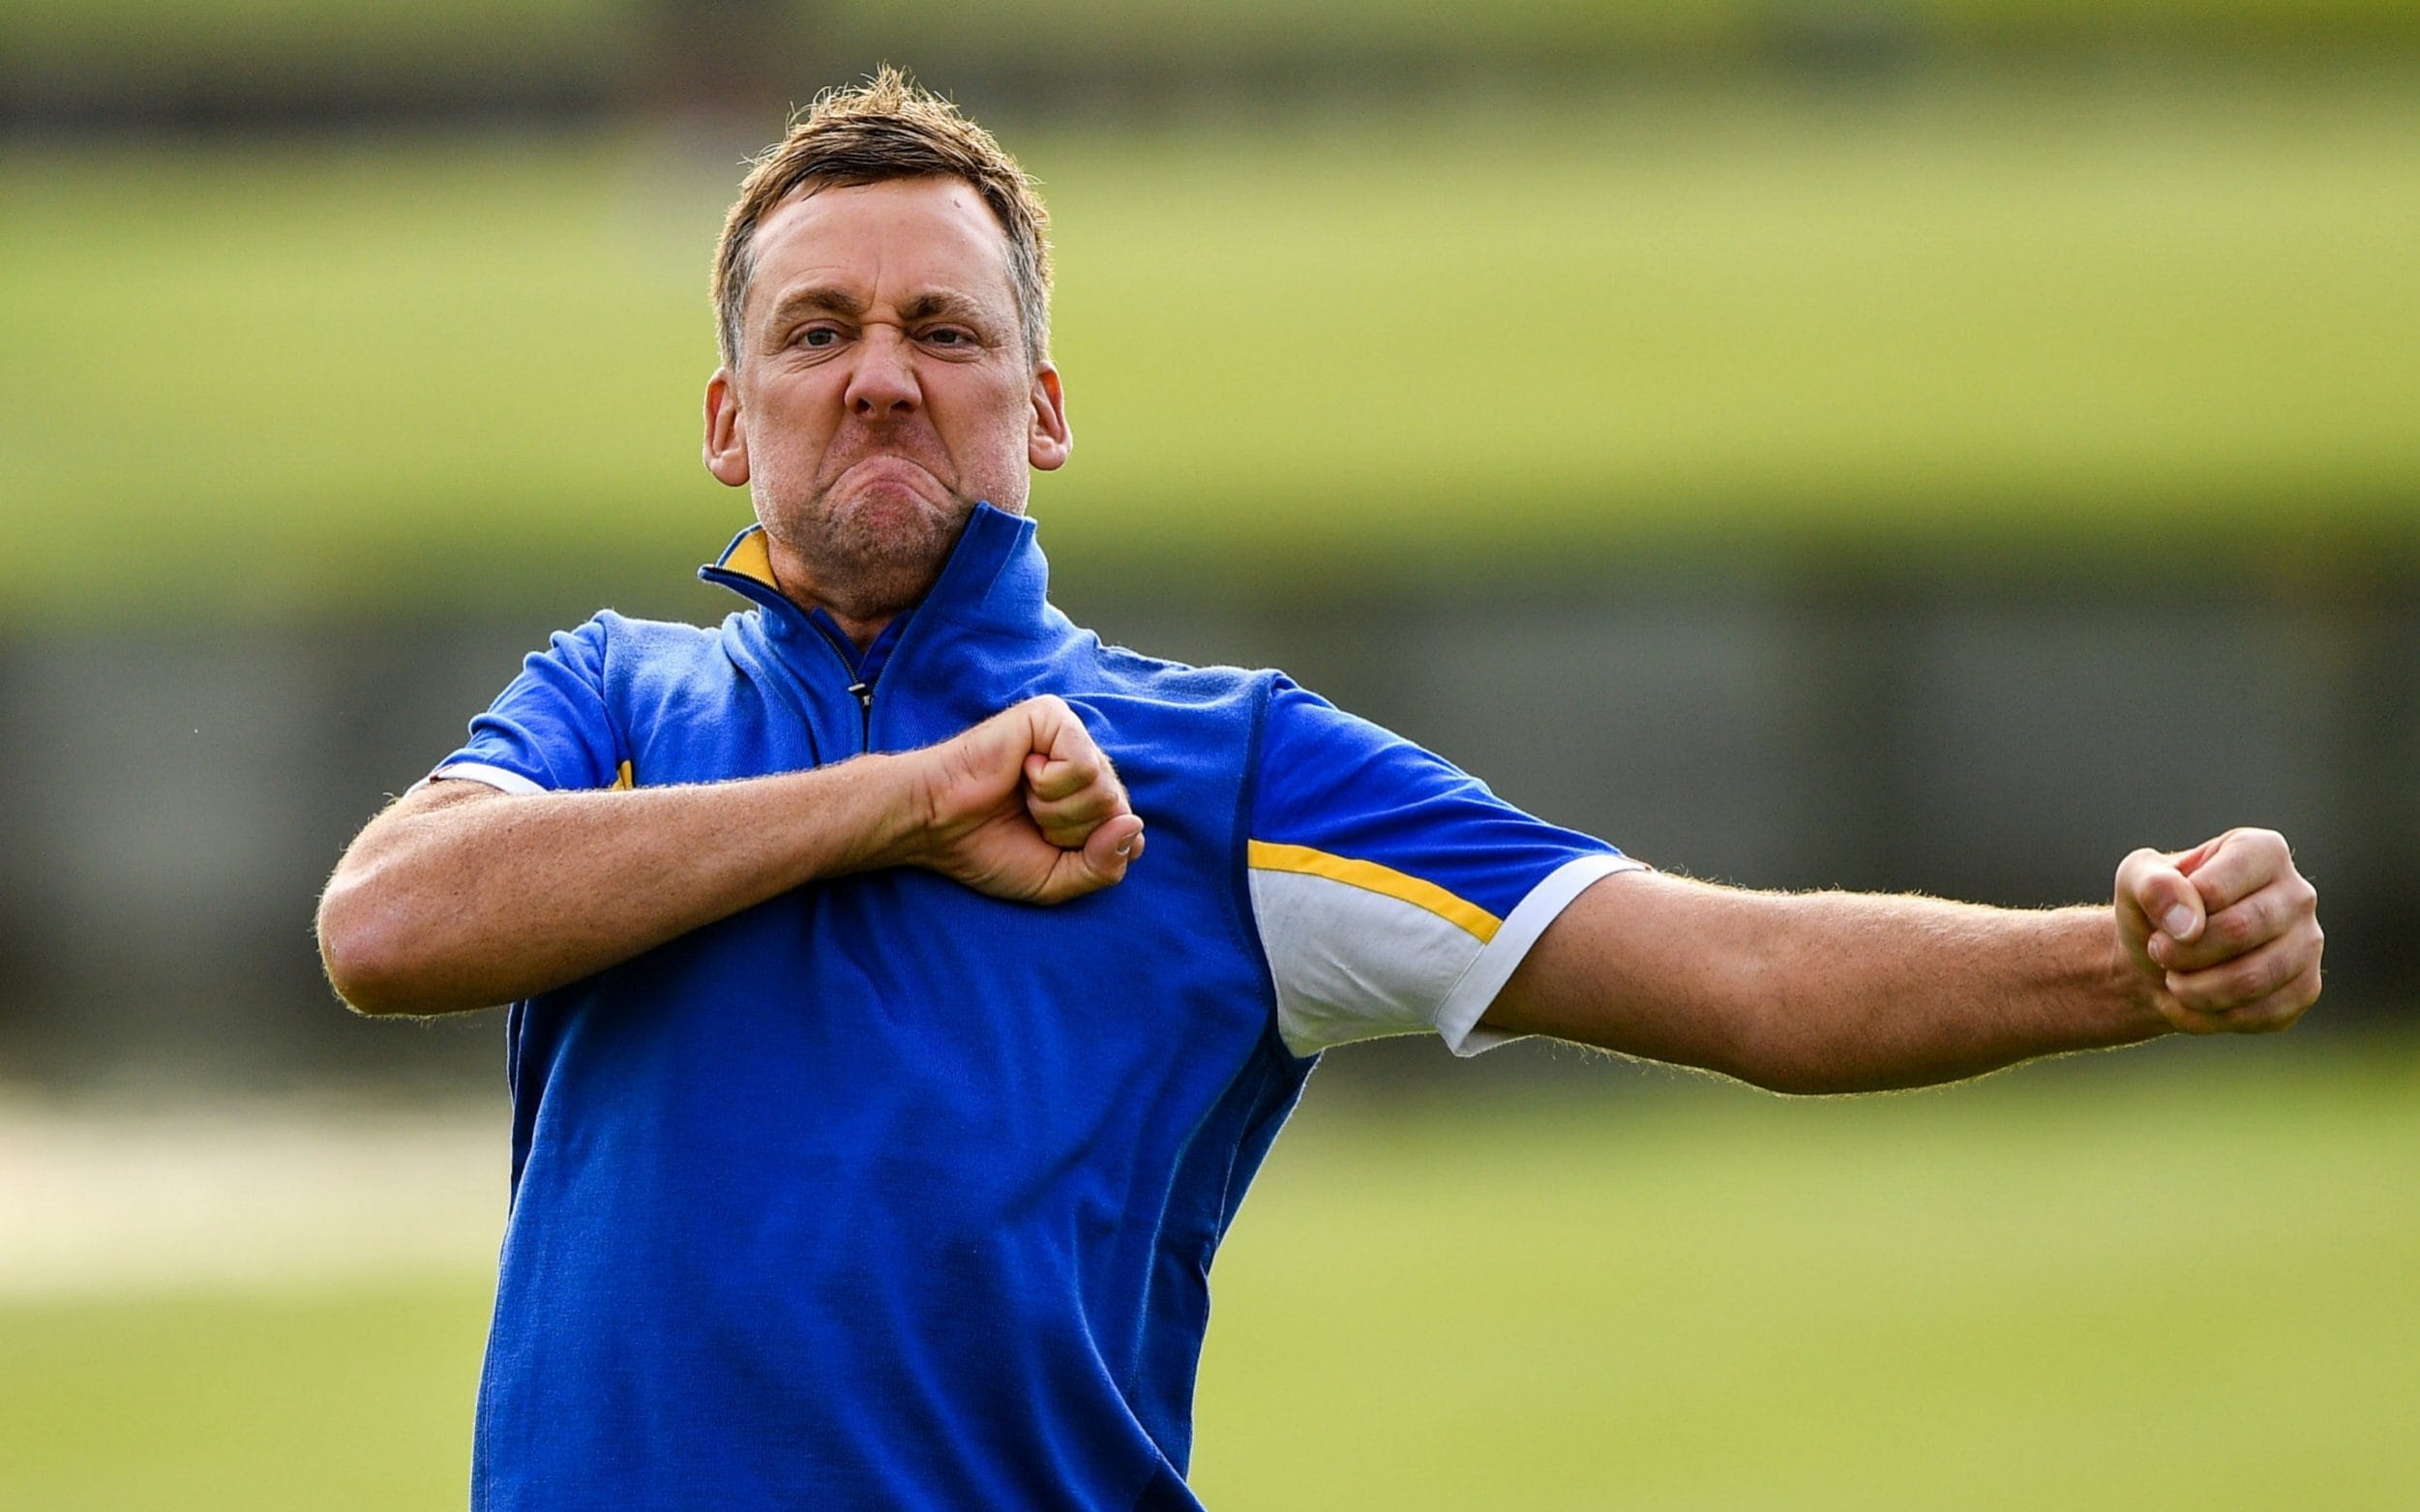 Ian Poulter: Mr. Ryder Cup